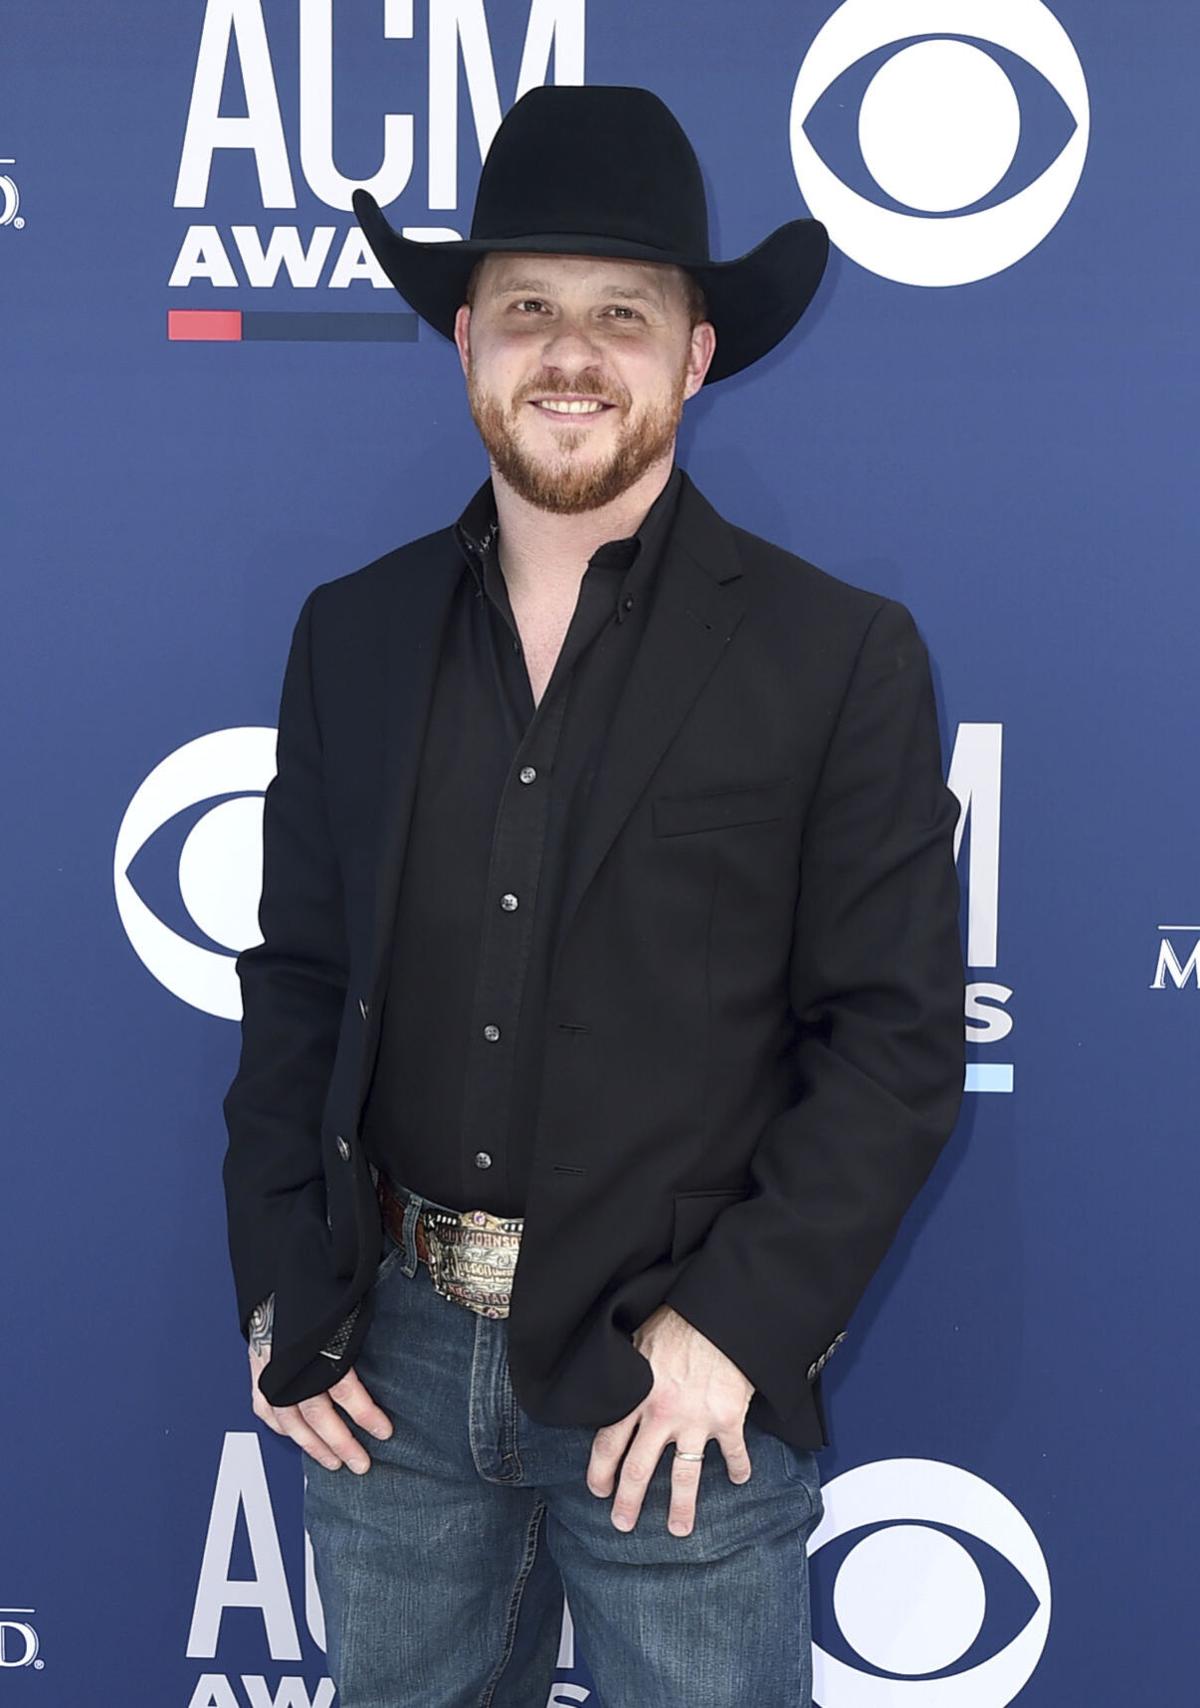 Cody Johnson concert announced for arena Lincoln News Sentinel